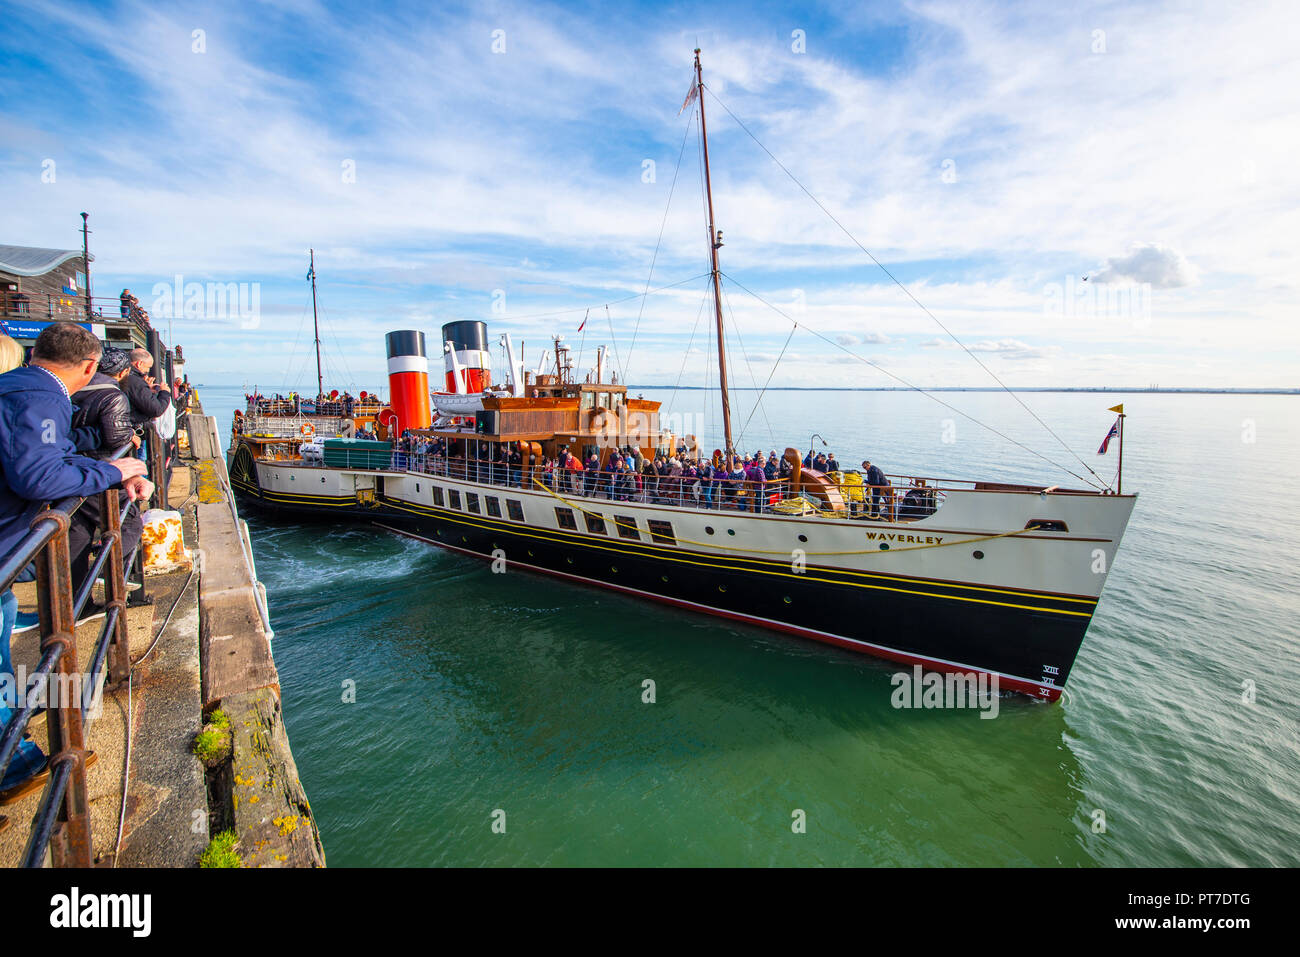 Paddle Steamer Waverley pulling away from Southend Pier on the Thames Estuary with passengers heading towards London, UK Stock Photo